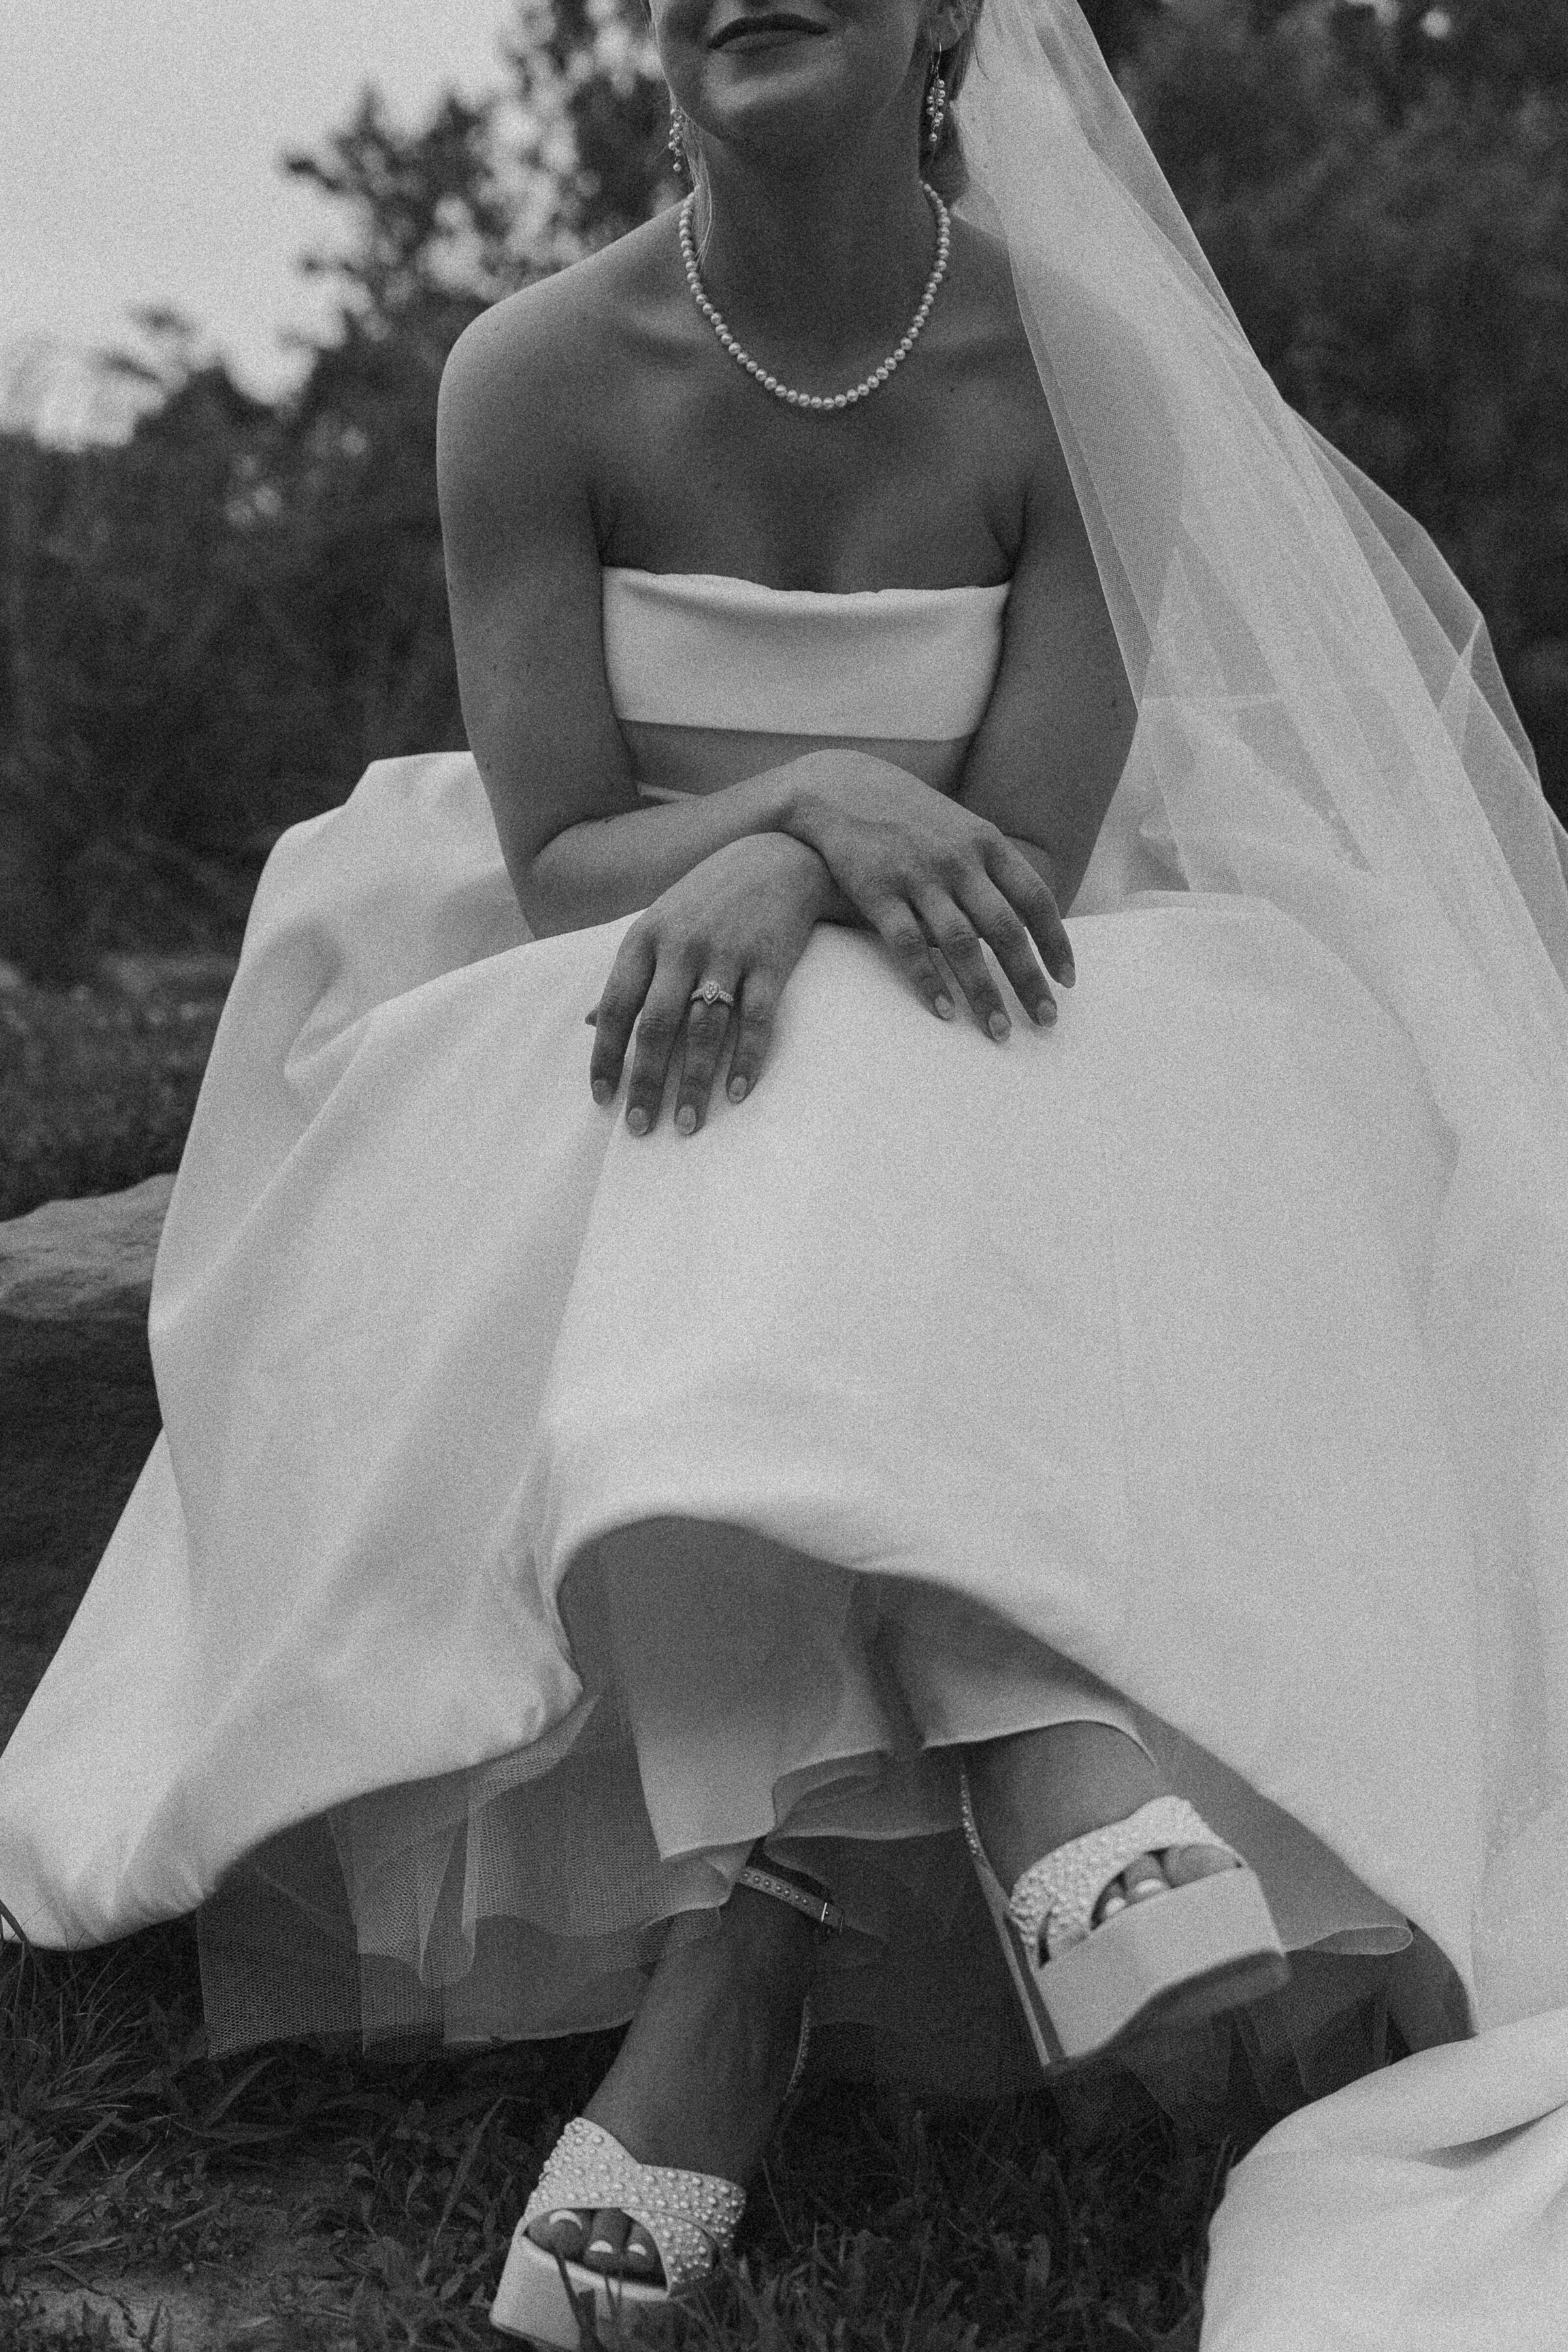 Black and white photo of a bride sitting down showing her shoes.